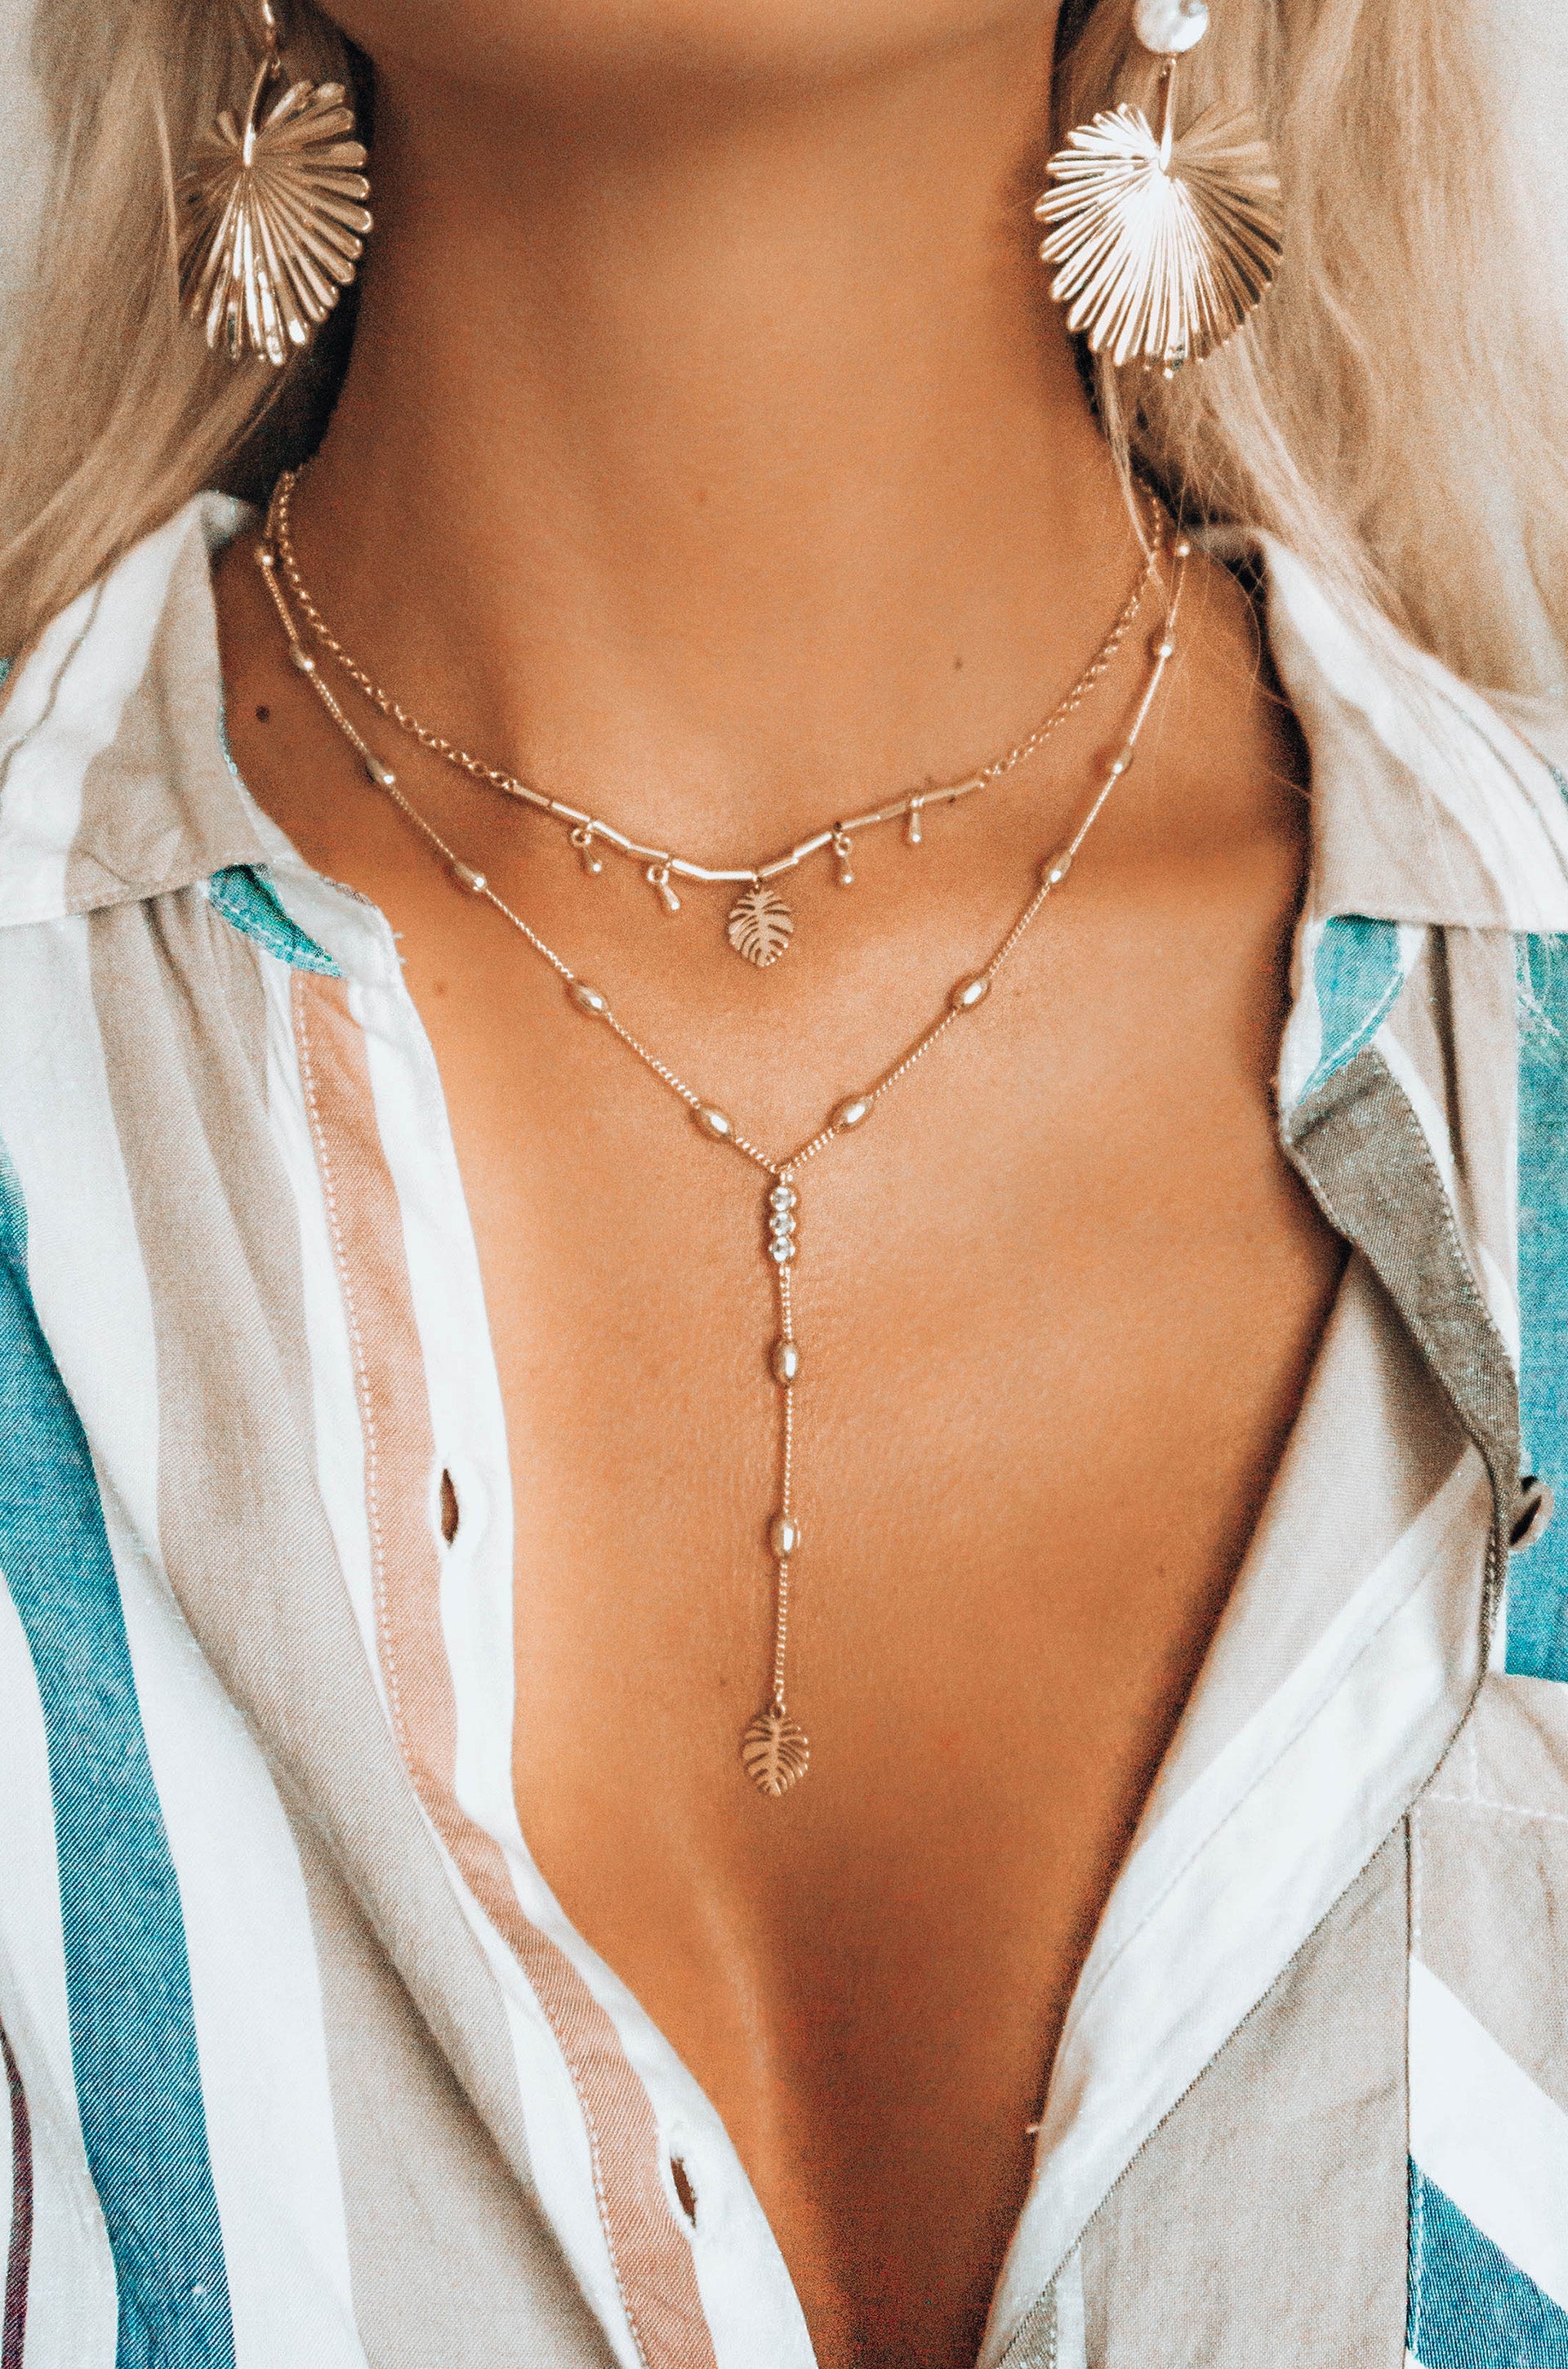 Under the Palms 18k Gold Plated Layered Lariat Necklace shown on a model  